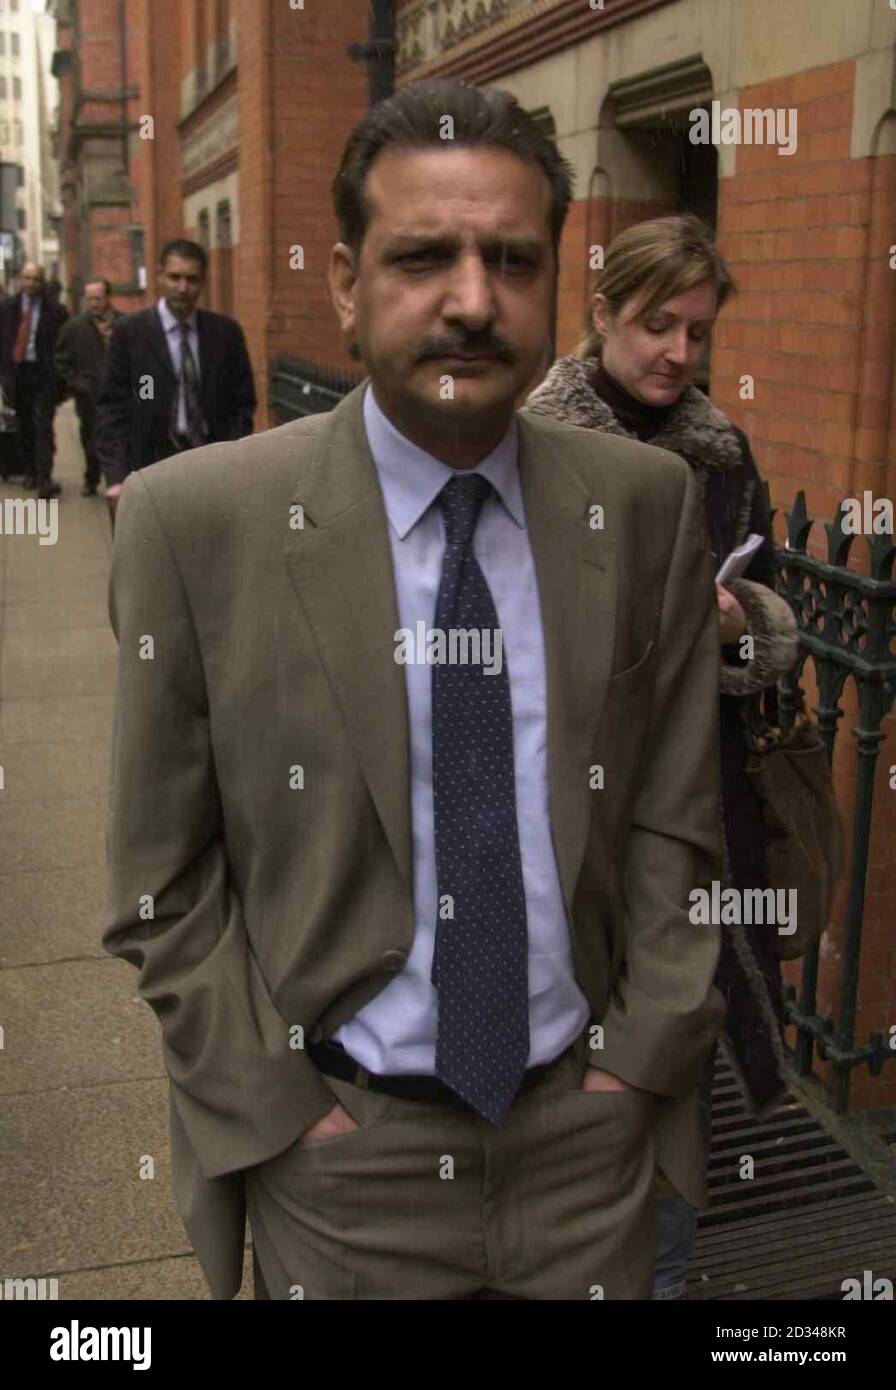 Labour Councillor Shah Jahan leaves an inquiry into alleged postal vote irregularities. Six Birmingham Labour councillors are today facing allegations of postal voting fraud at last year's English local authority and European elections. The councillors, who represent the Aston and Bordesley Green wards on Birmingham City Council, have strenuously denied rigging the June 10, 2004 ballots and being improperly elected. Stock Photo